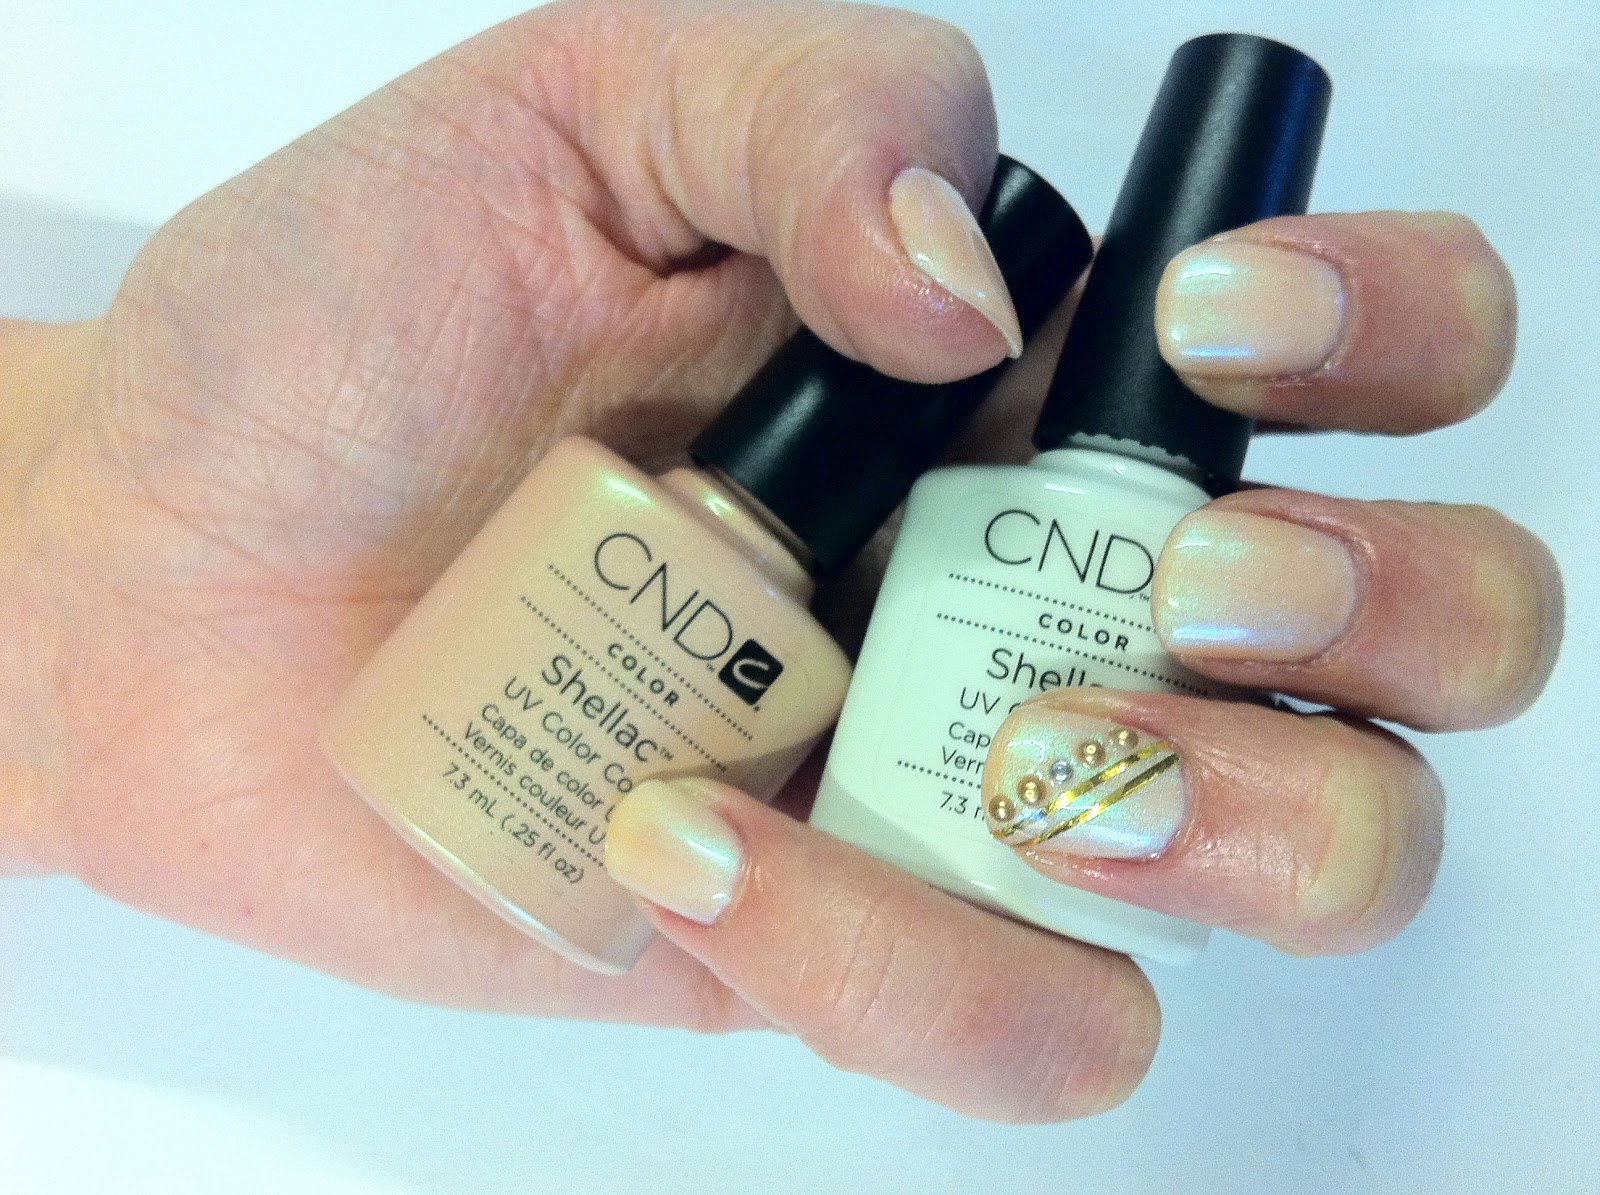 2. 10 Easy CND Shellac Nail Art Tutorials for Beginners - wide 2